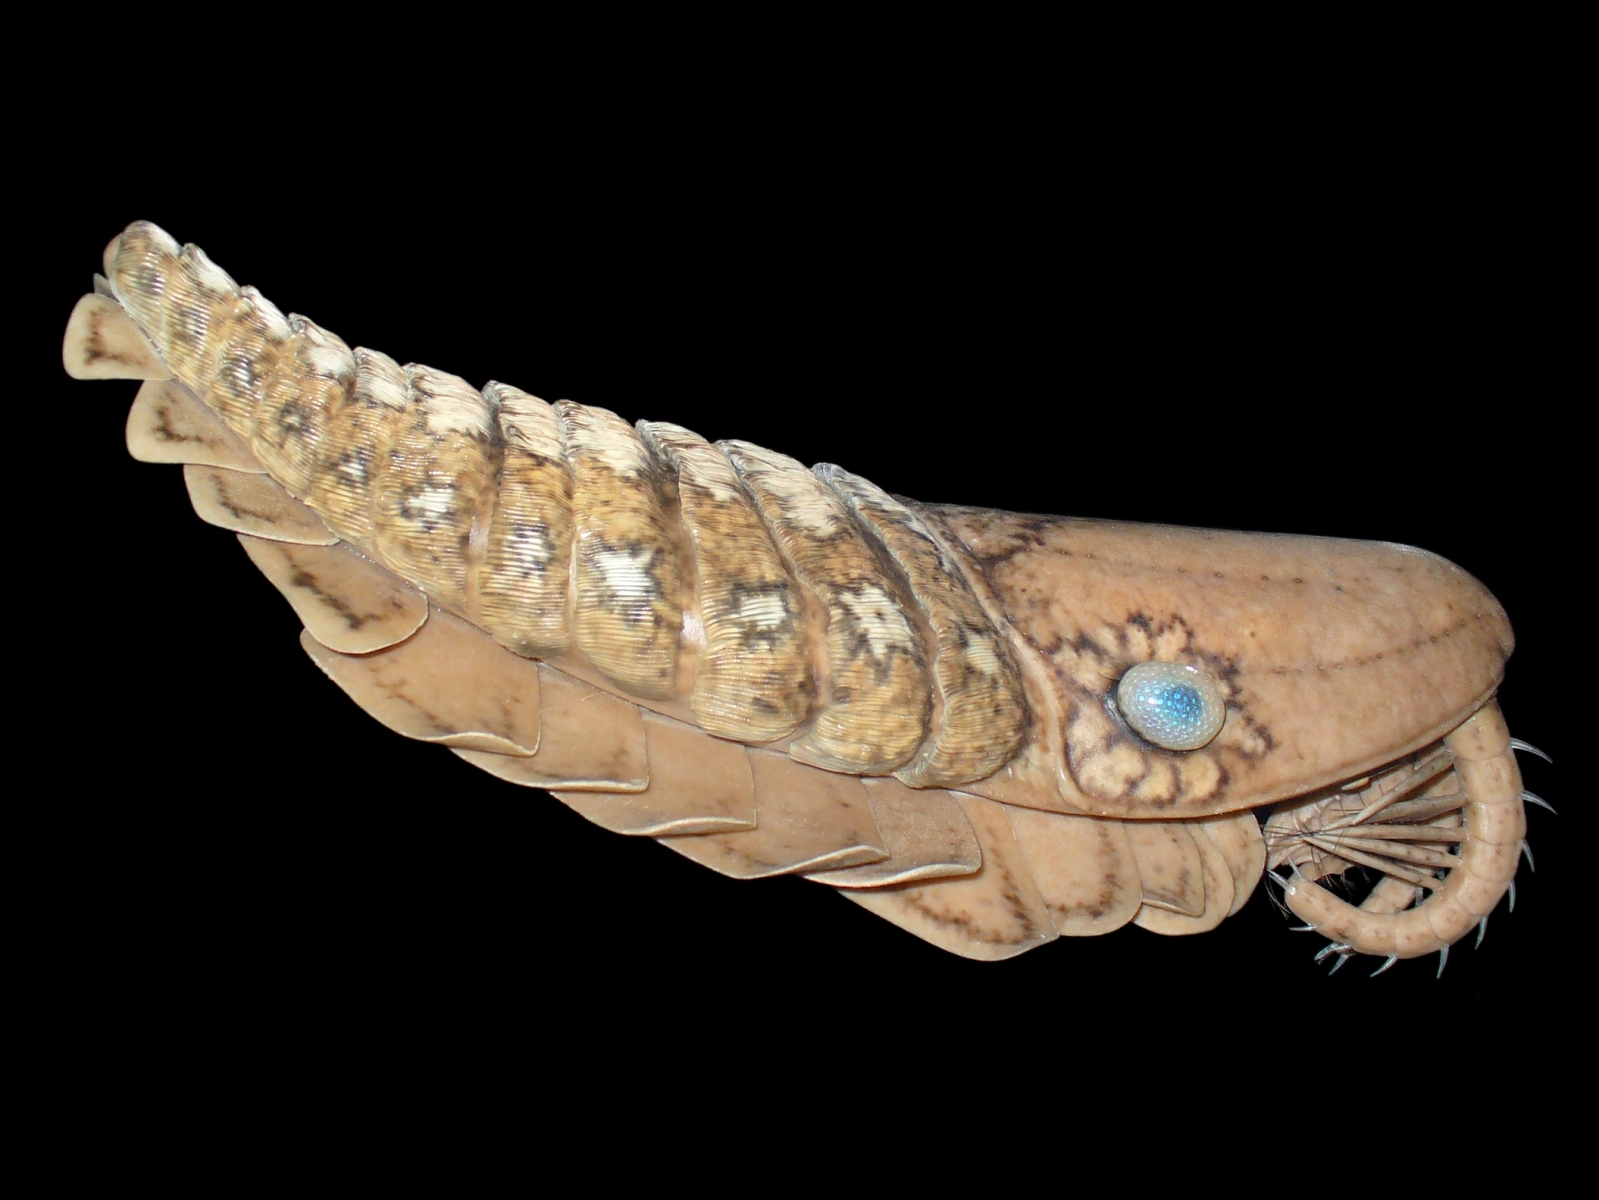 Laggania cambria, an anomalocaridid, showing the dorsal blades along the back, and swimming lobes down the sides.